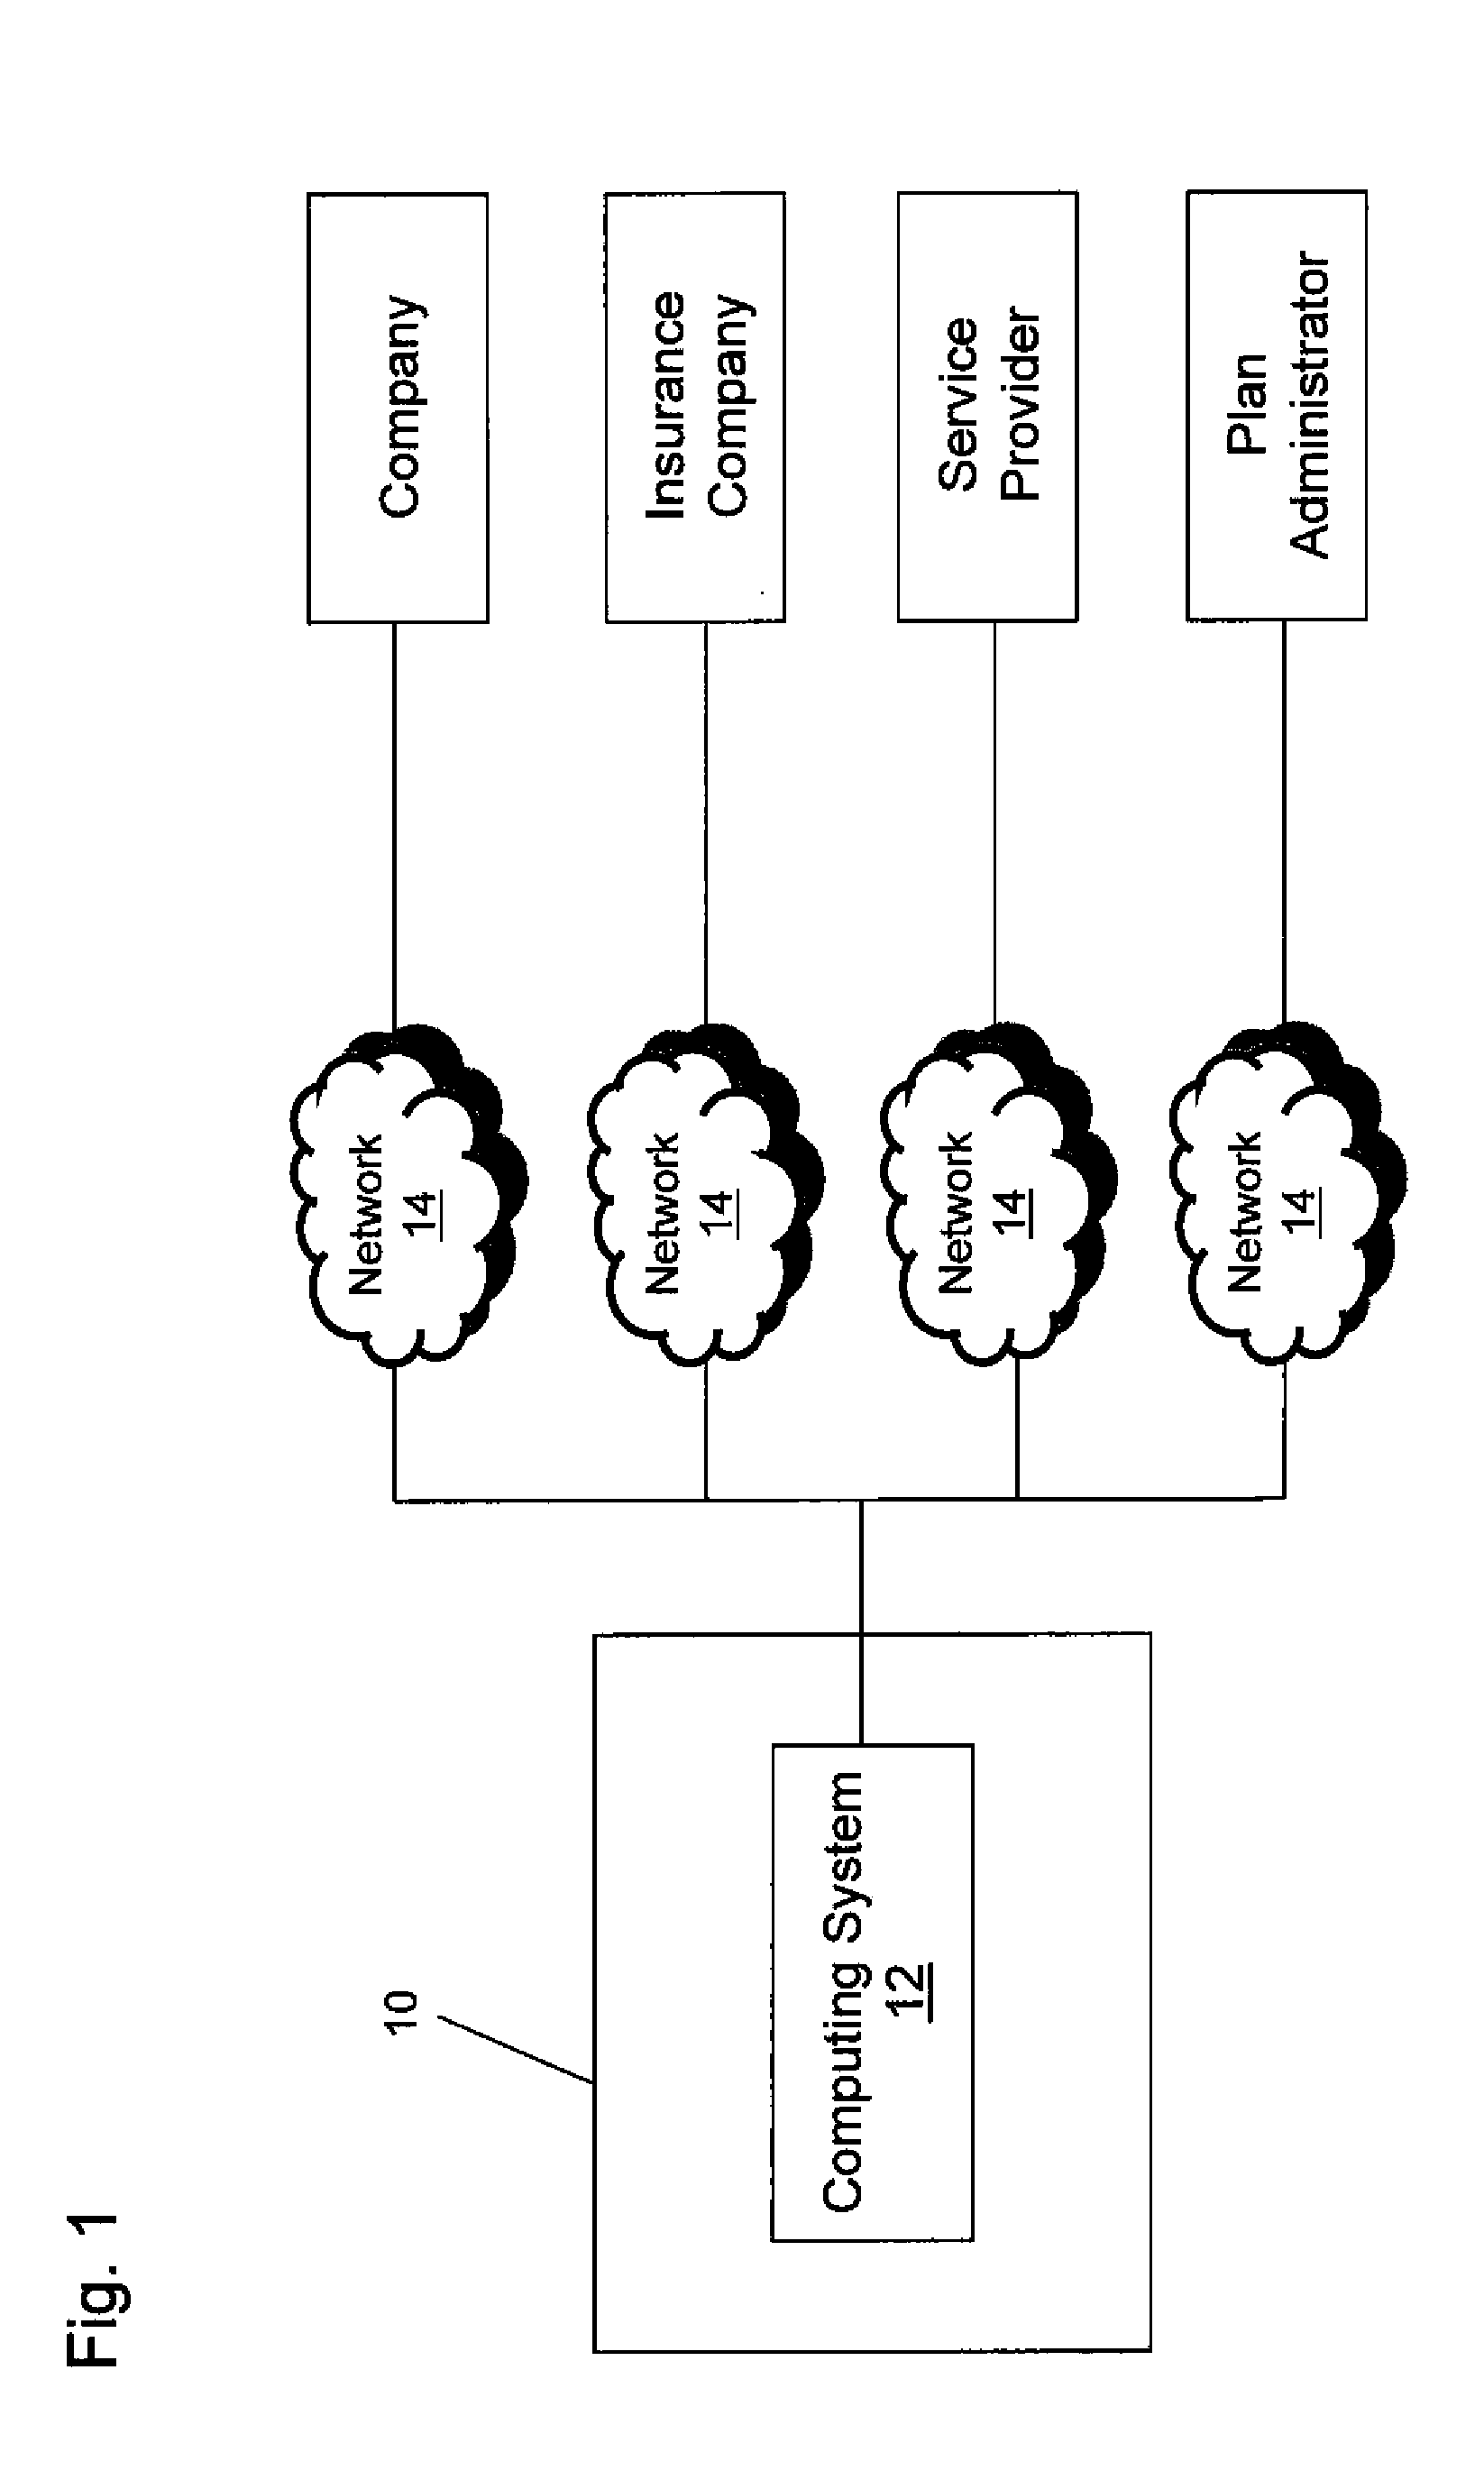 Systems and methods for providing value-based insurance design and benefits